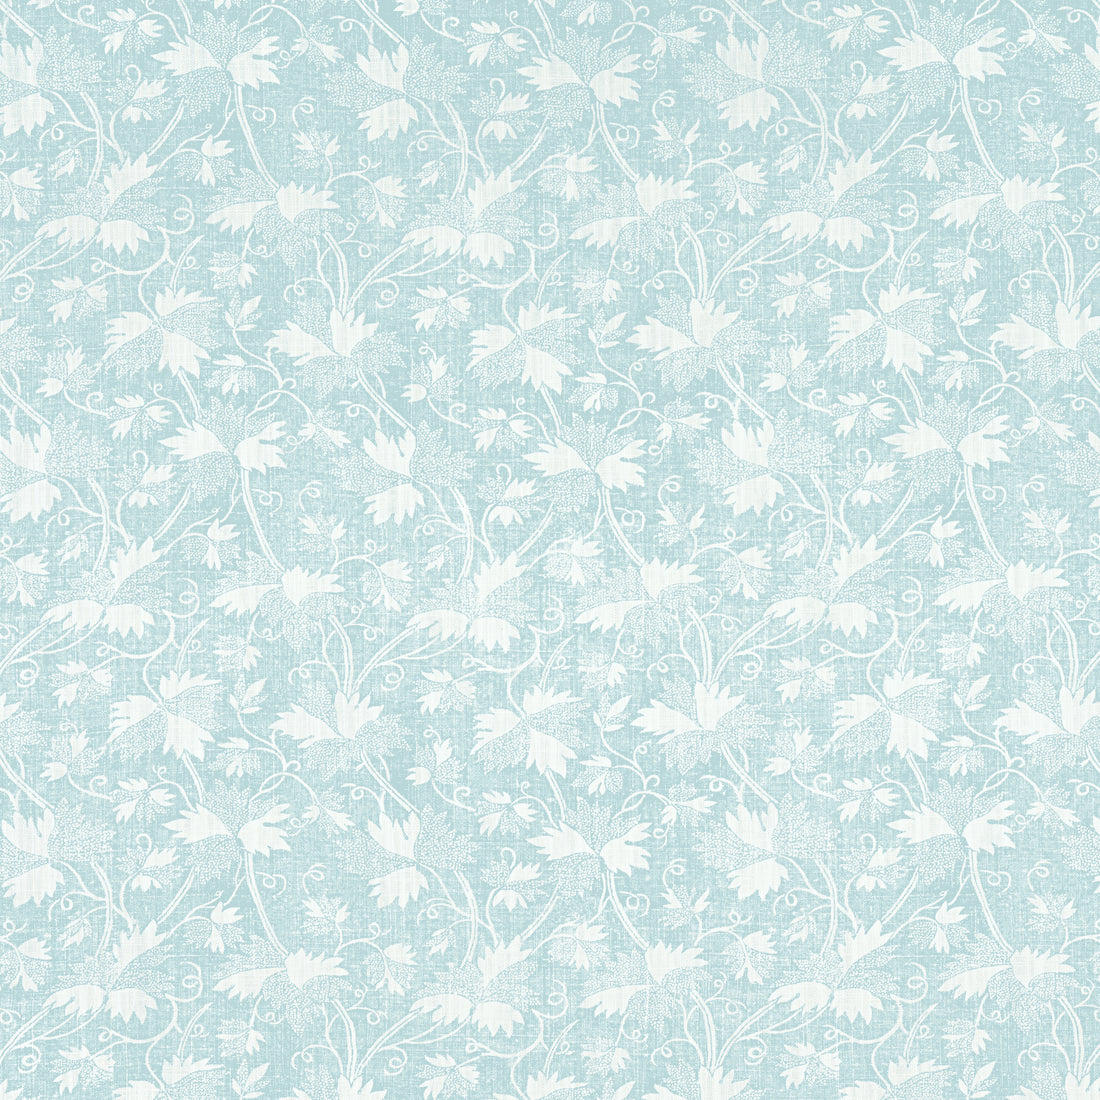 Chester fabric in seaglass color - pattern number F936432 - by Thibaut in the Indienne collection